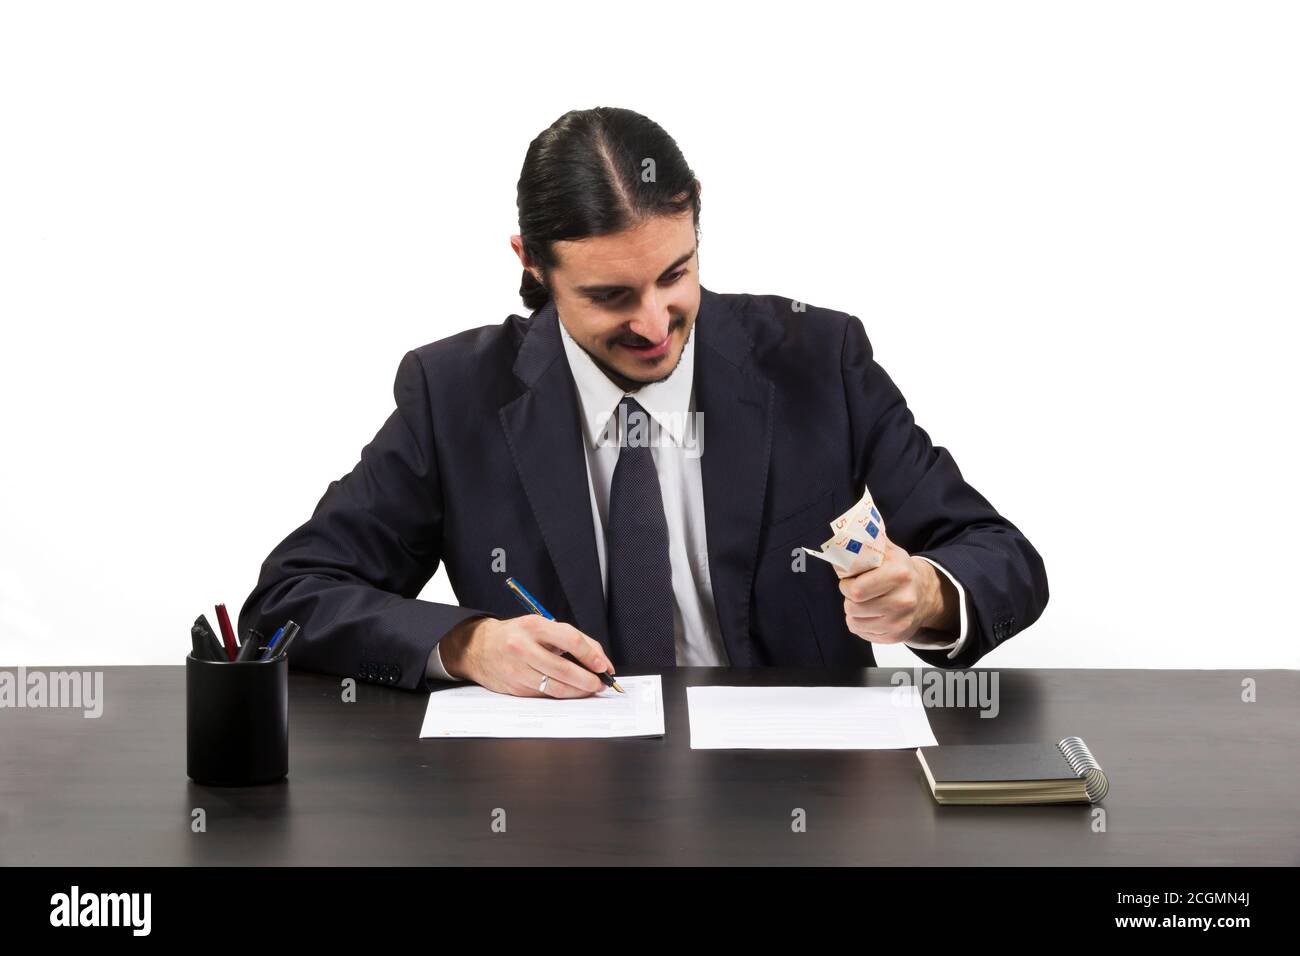 Greedy ambitious man working at his desk Stock Photo